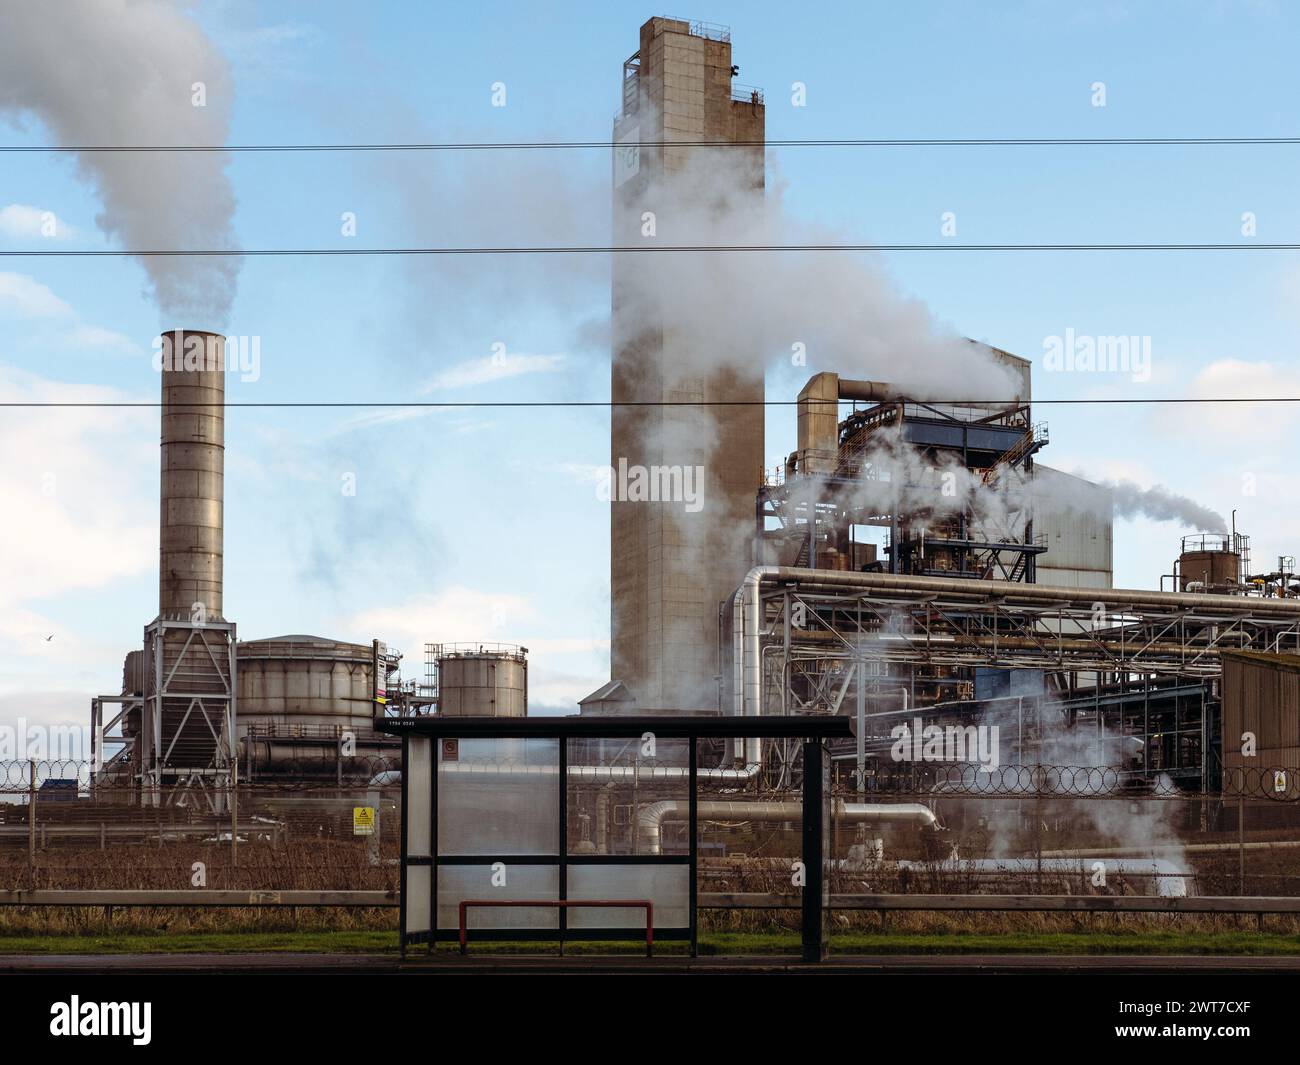 Bus stop in front of fertiliser plant and ICI tower in Stockton-on-tees. Chimneys bellow out steam and large industrial pipes in the background. UK Stock Photo